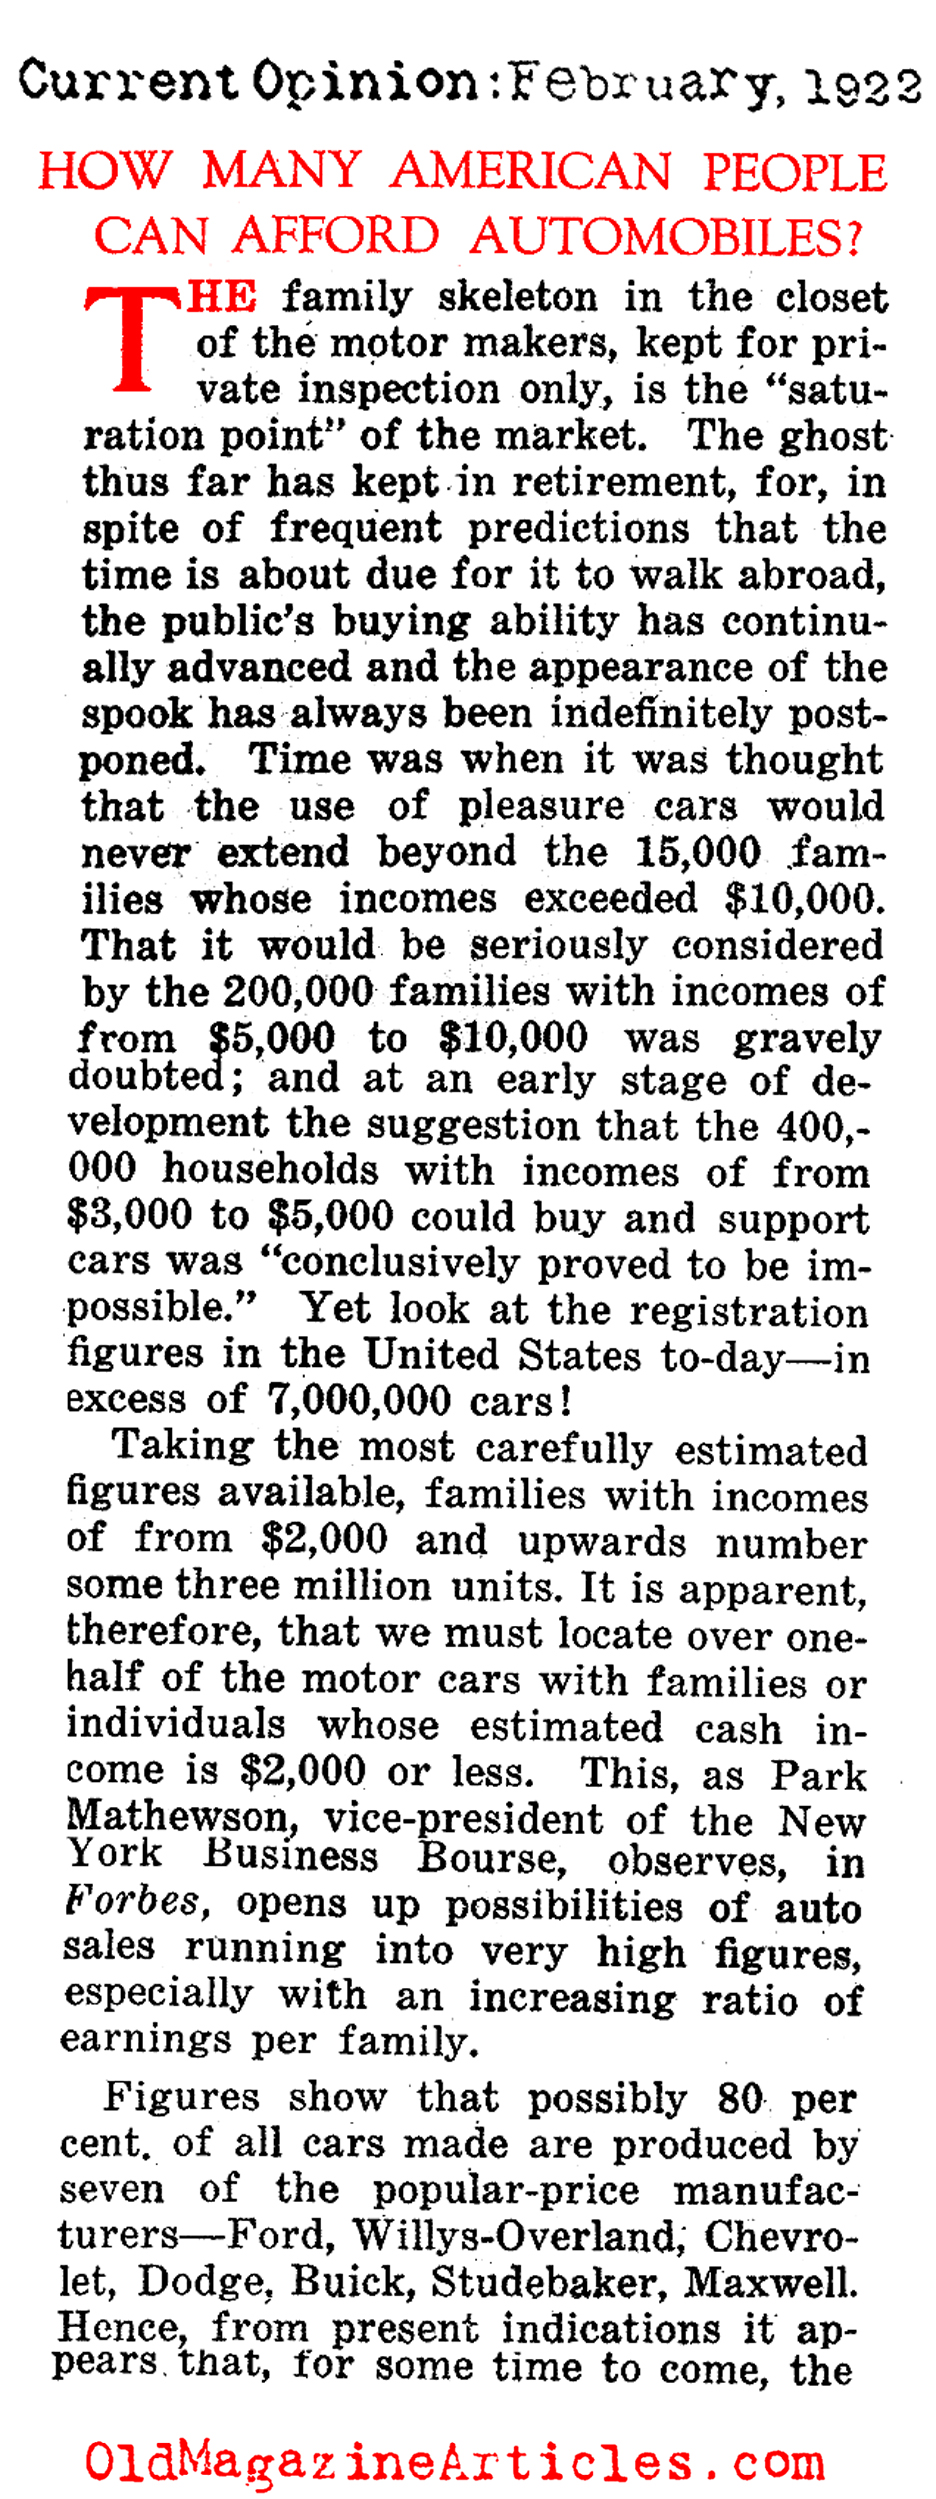 How Many Americans Had Cars in the 1920s? (Current Opinion, 1922)